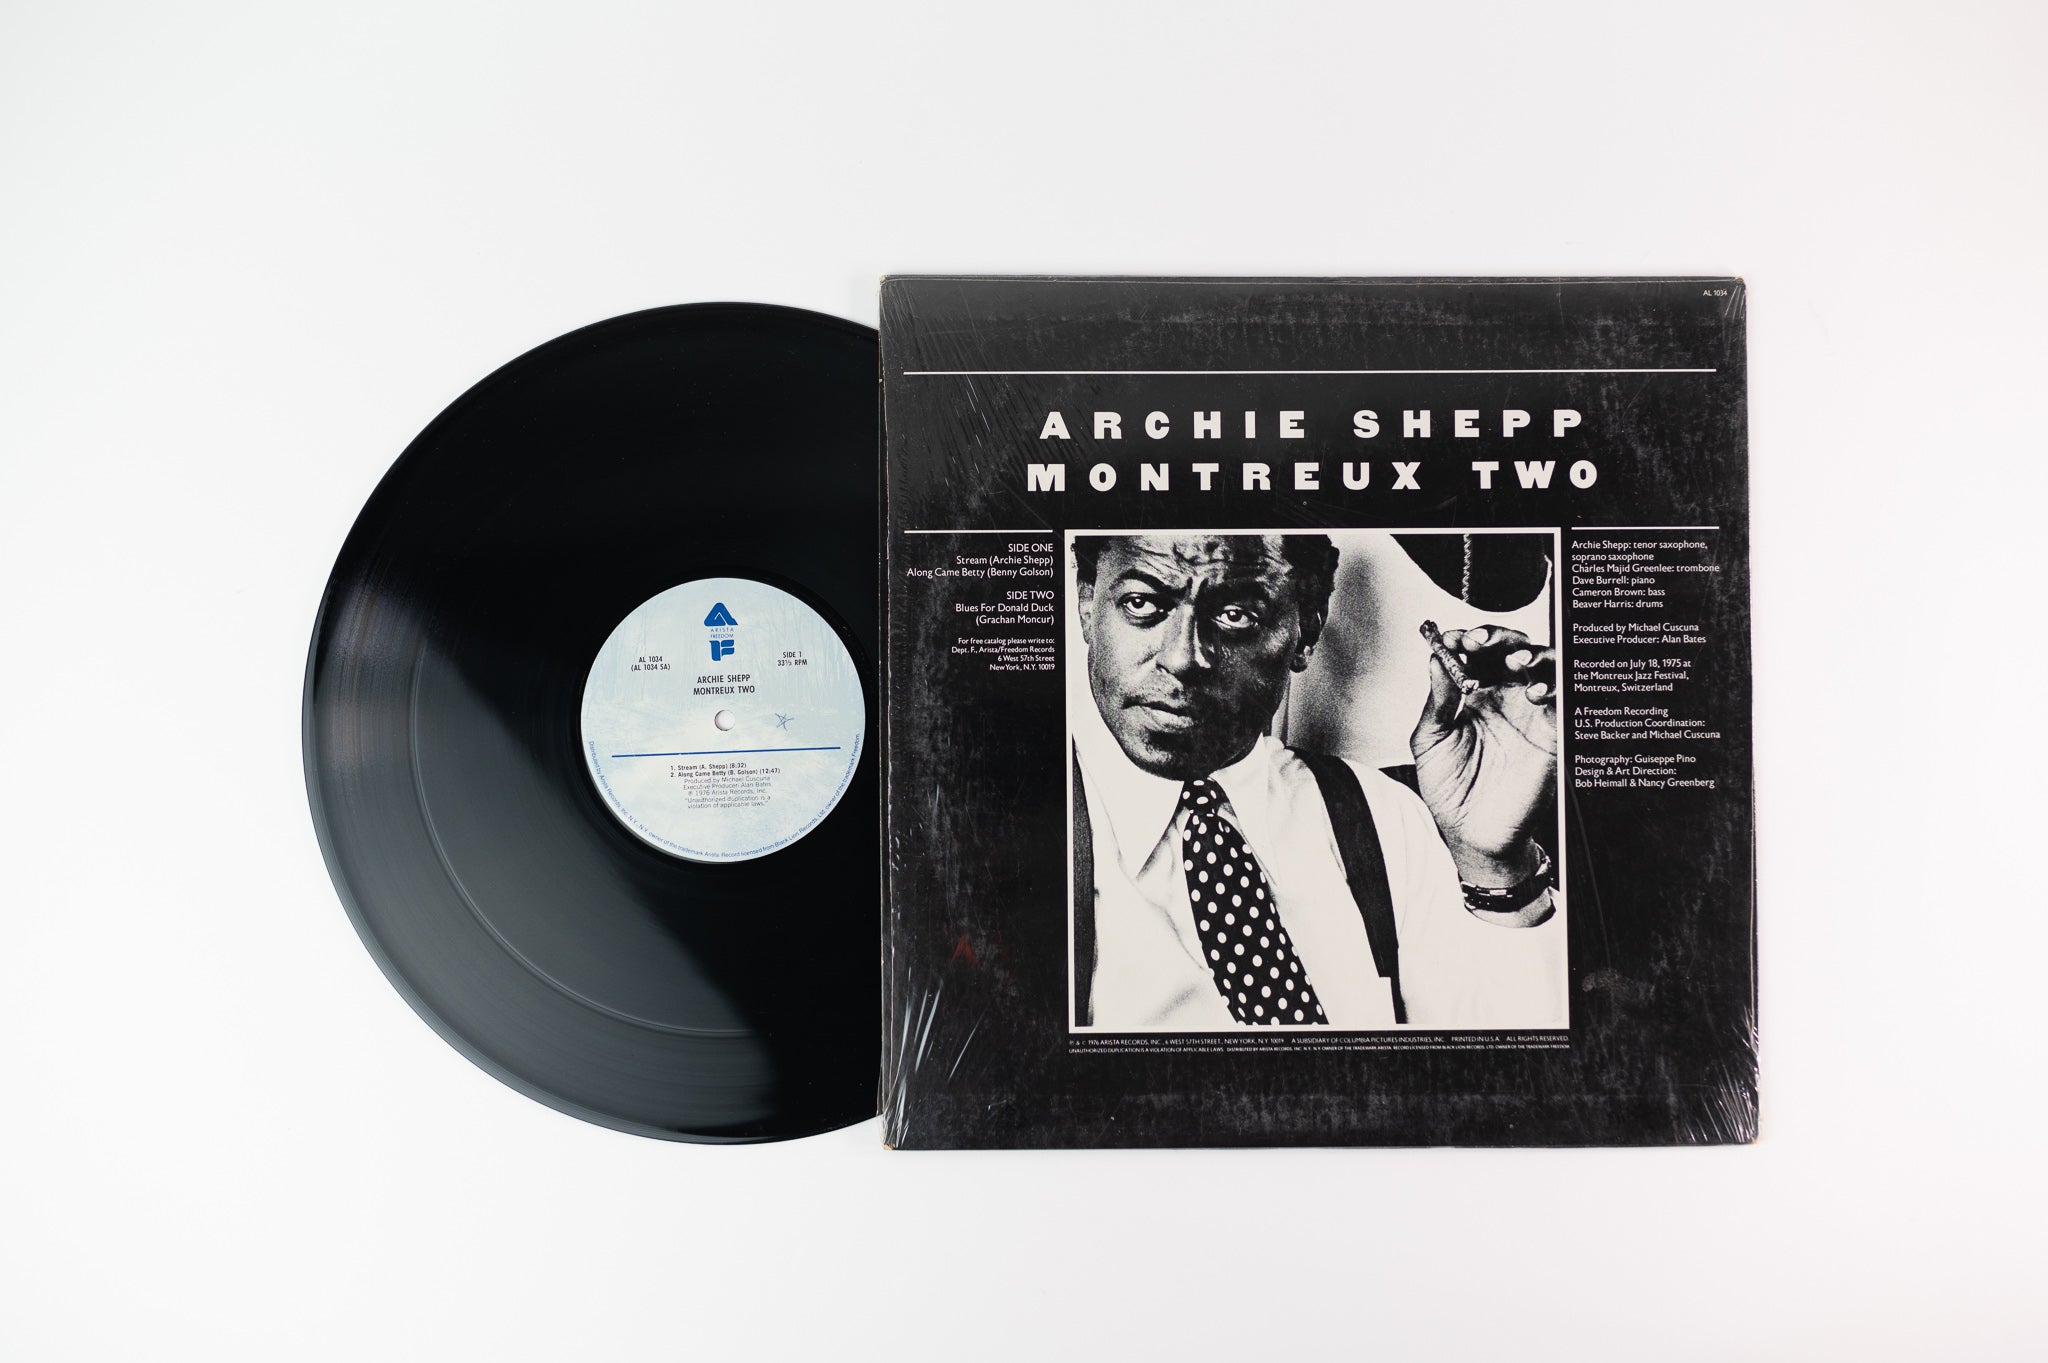 Archie Shepp - Montreux Two on Arista Freedom